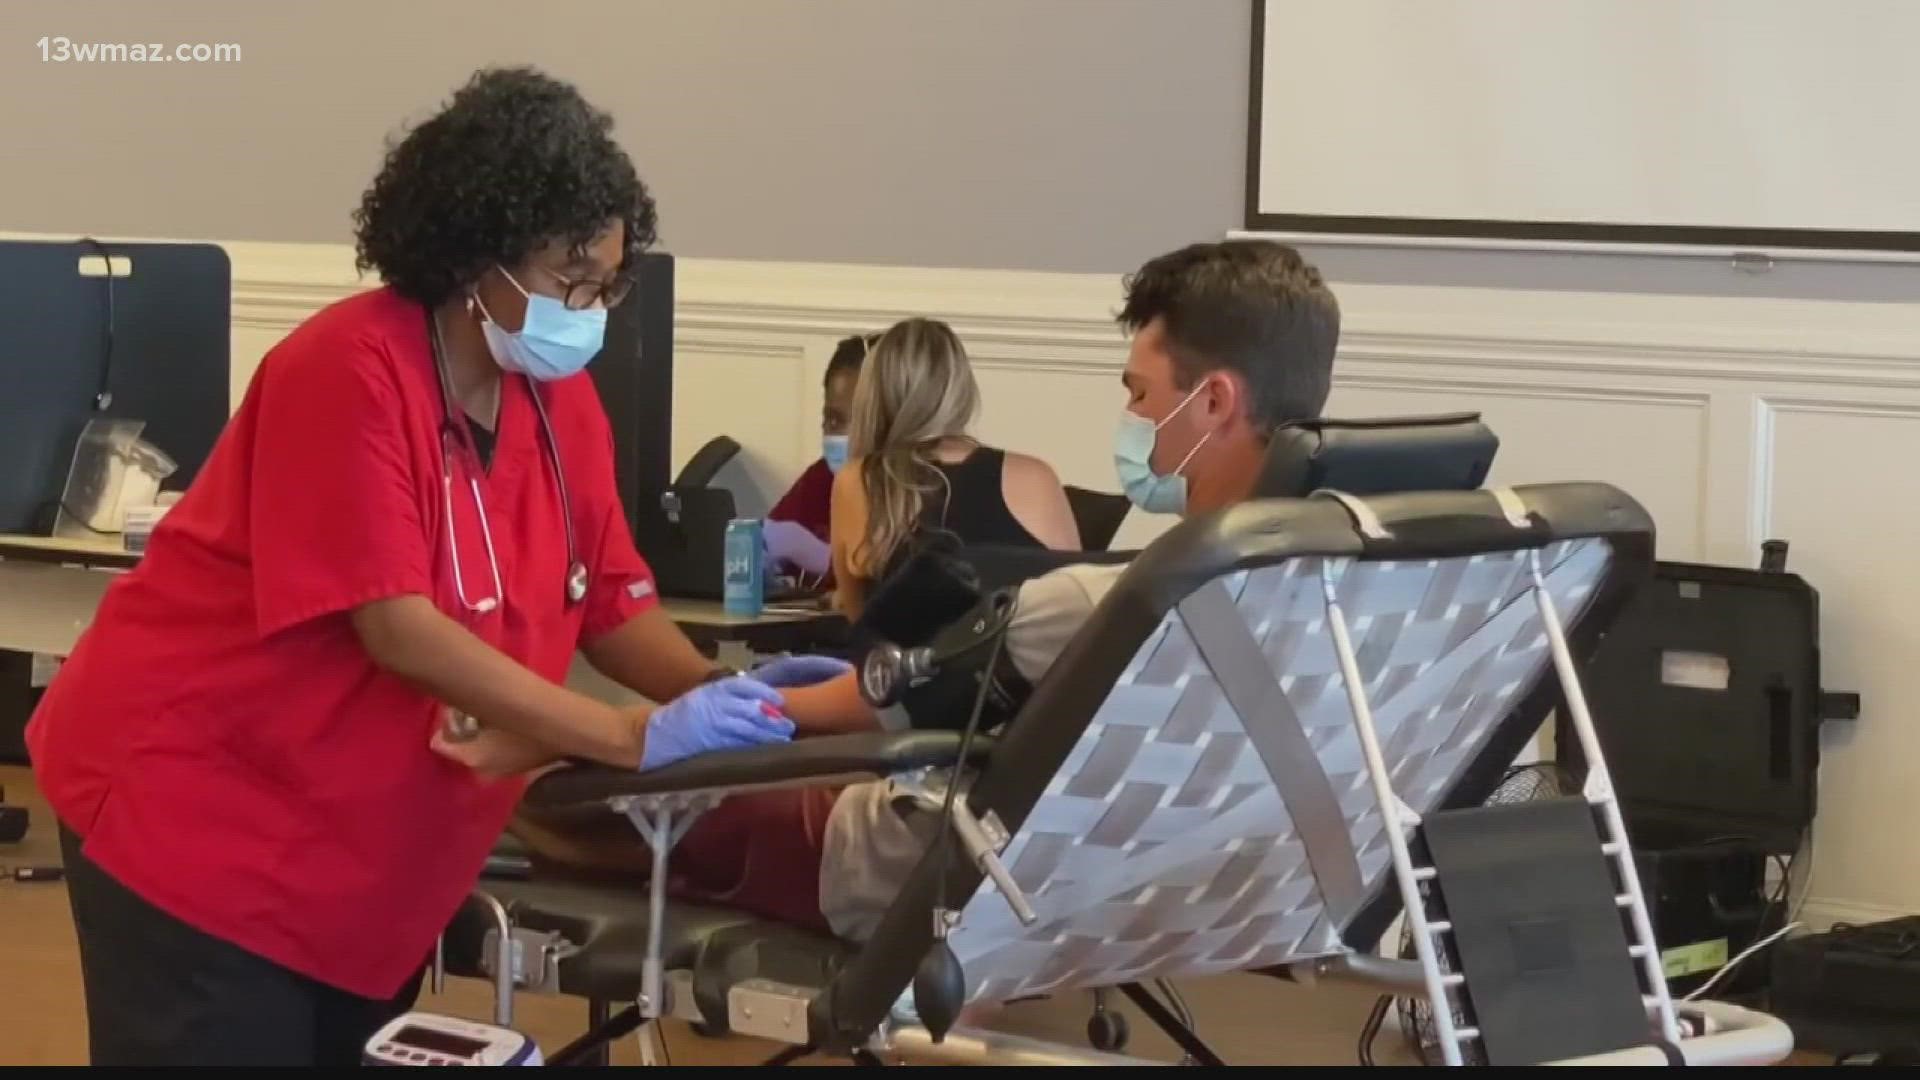 The Red Cross says they need to collect more than 1,000 additional blood donations each day to meet the current hospital demand and help relieve a blood shortage